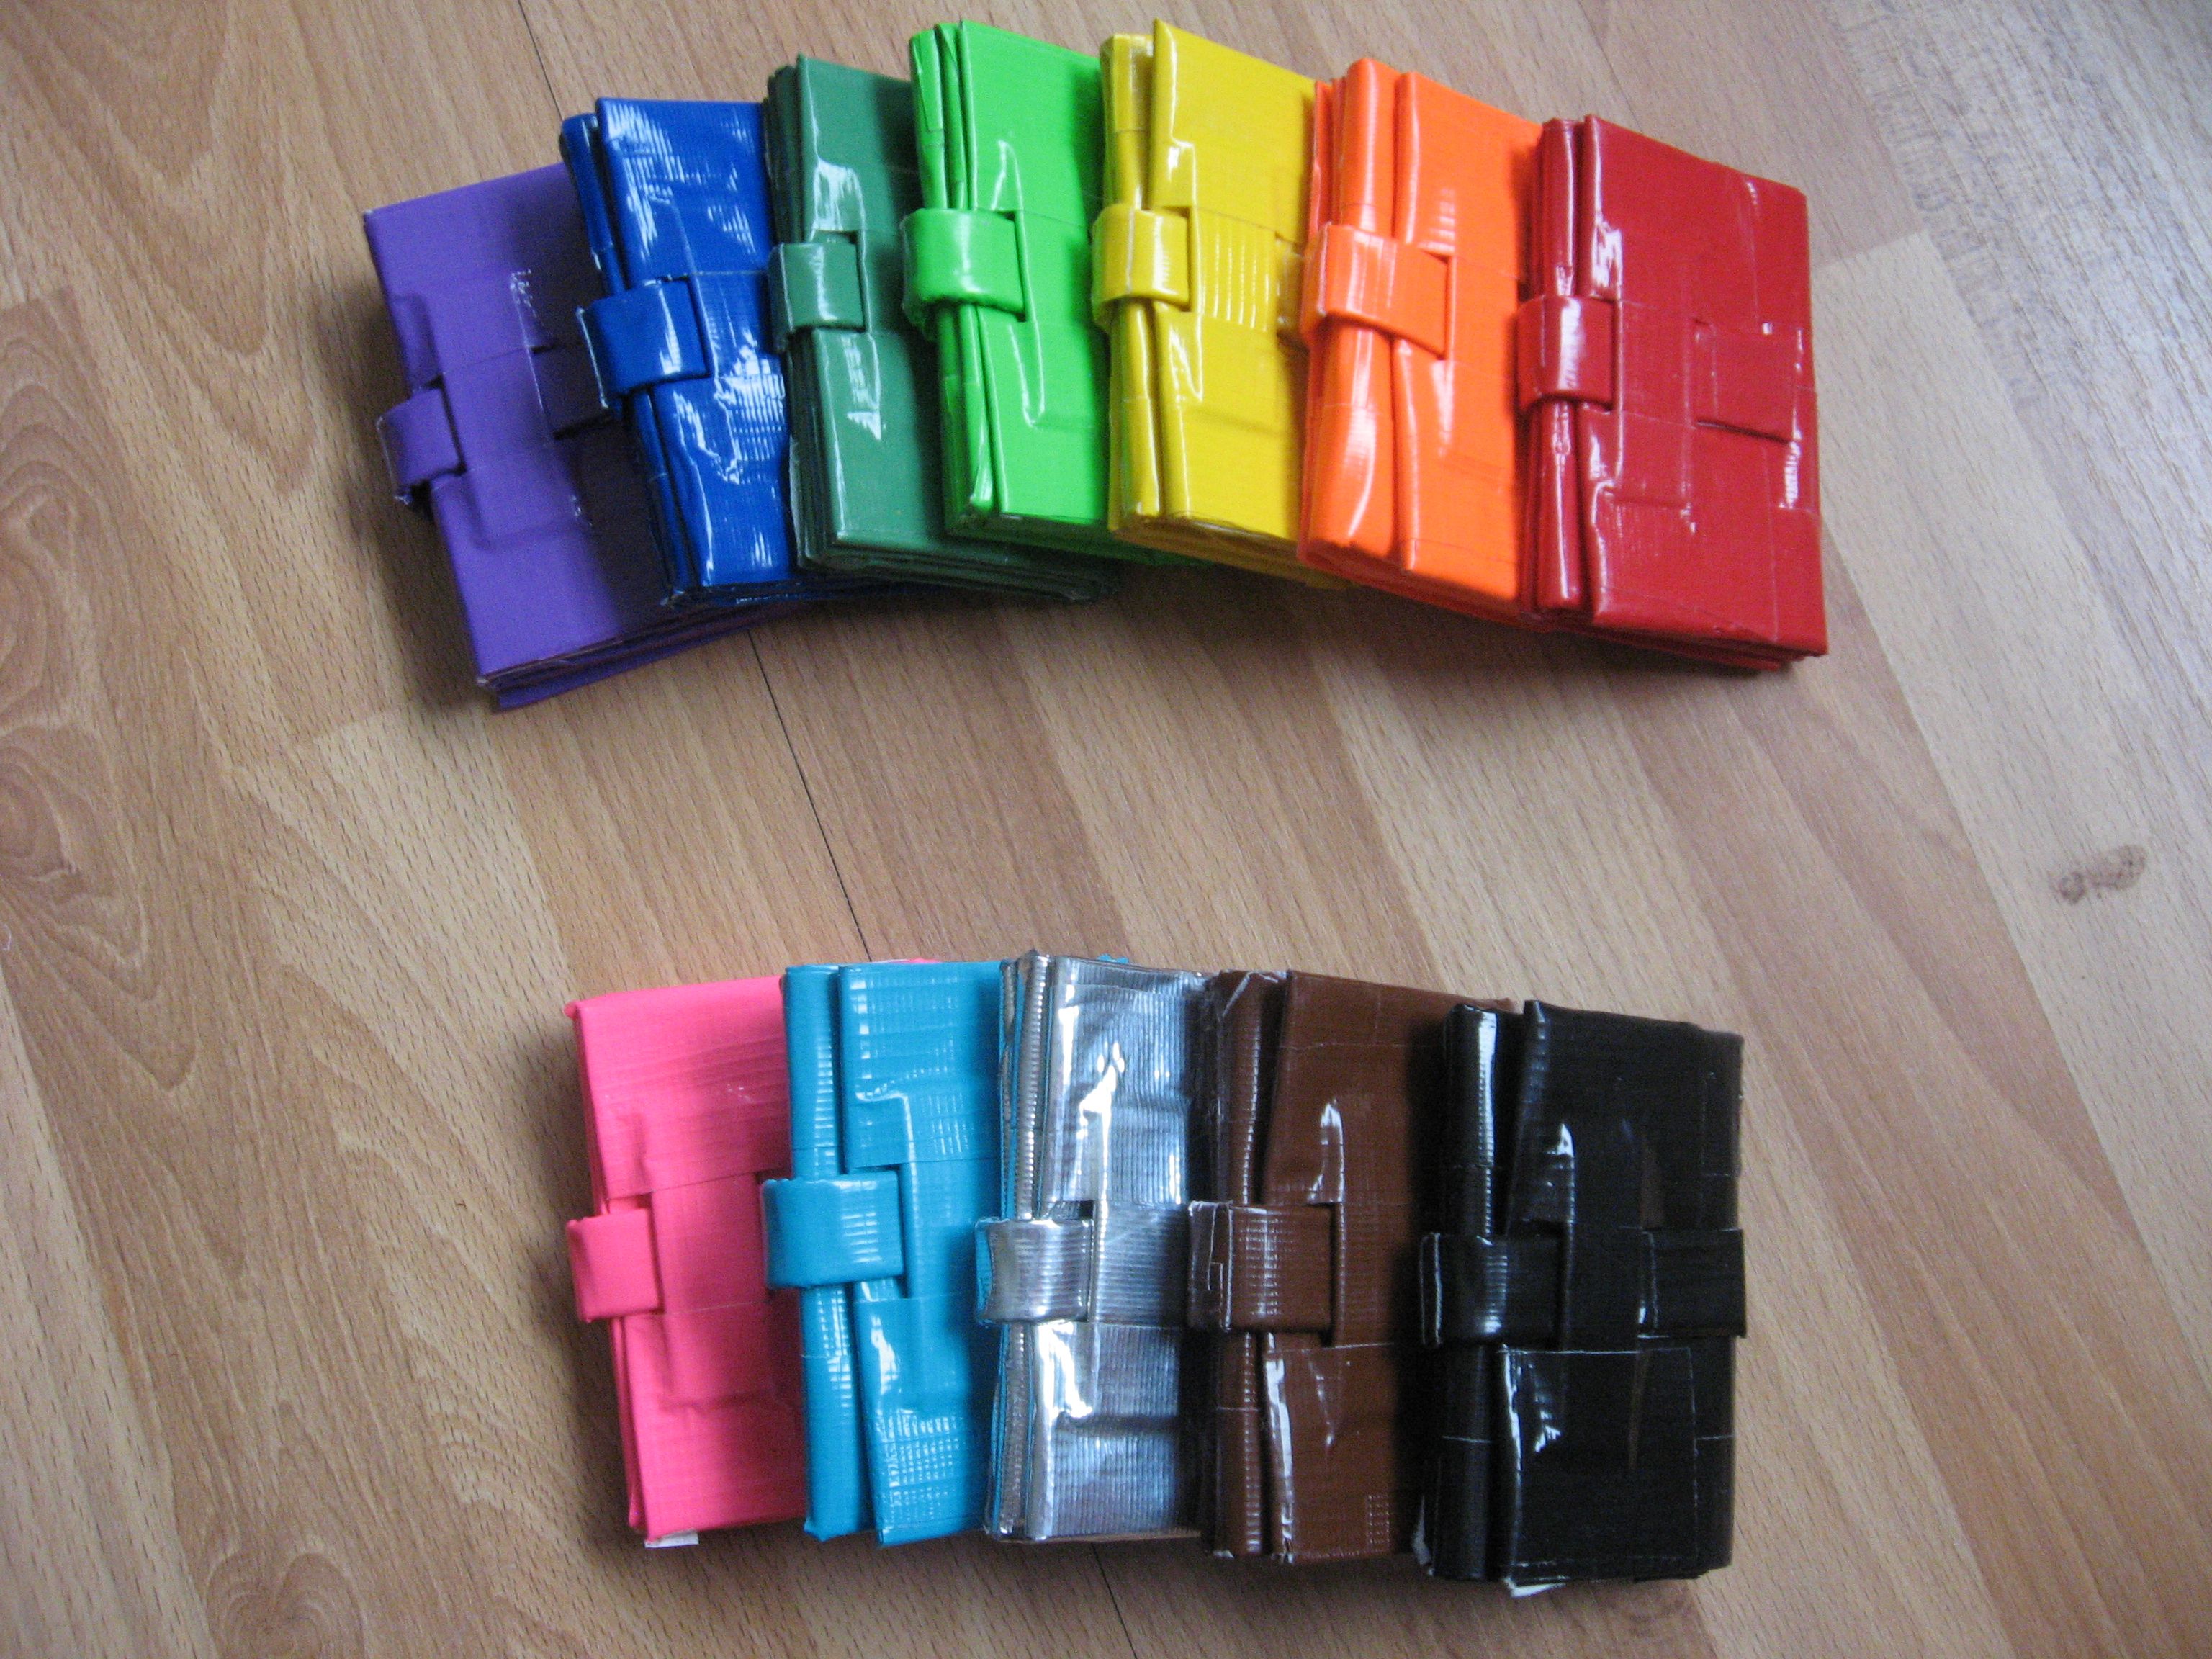 12 duct tape wallets in two rows of various colors in reverse rainbow order